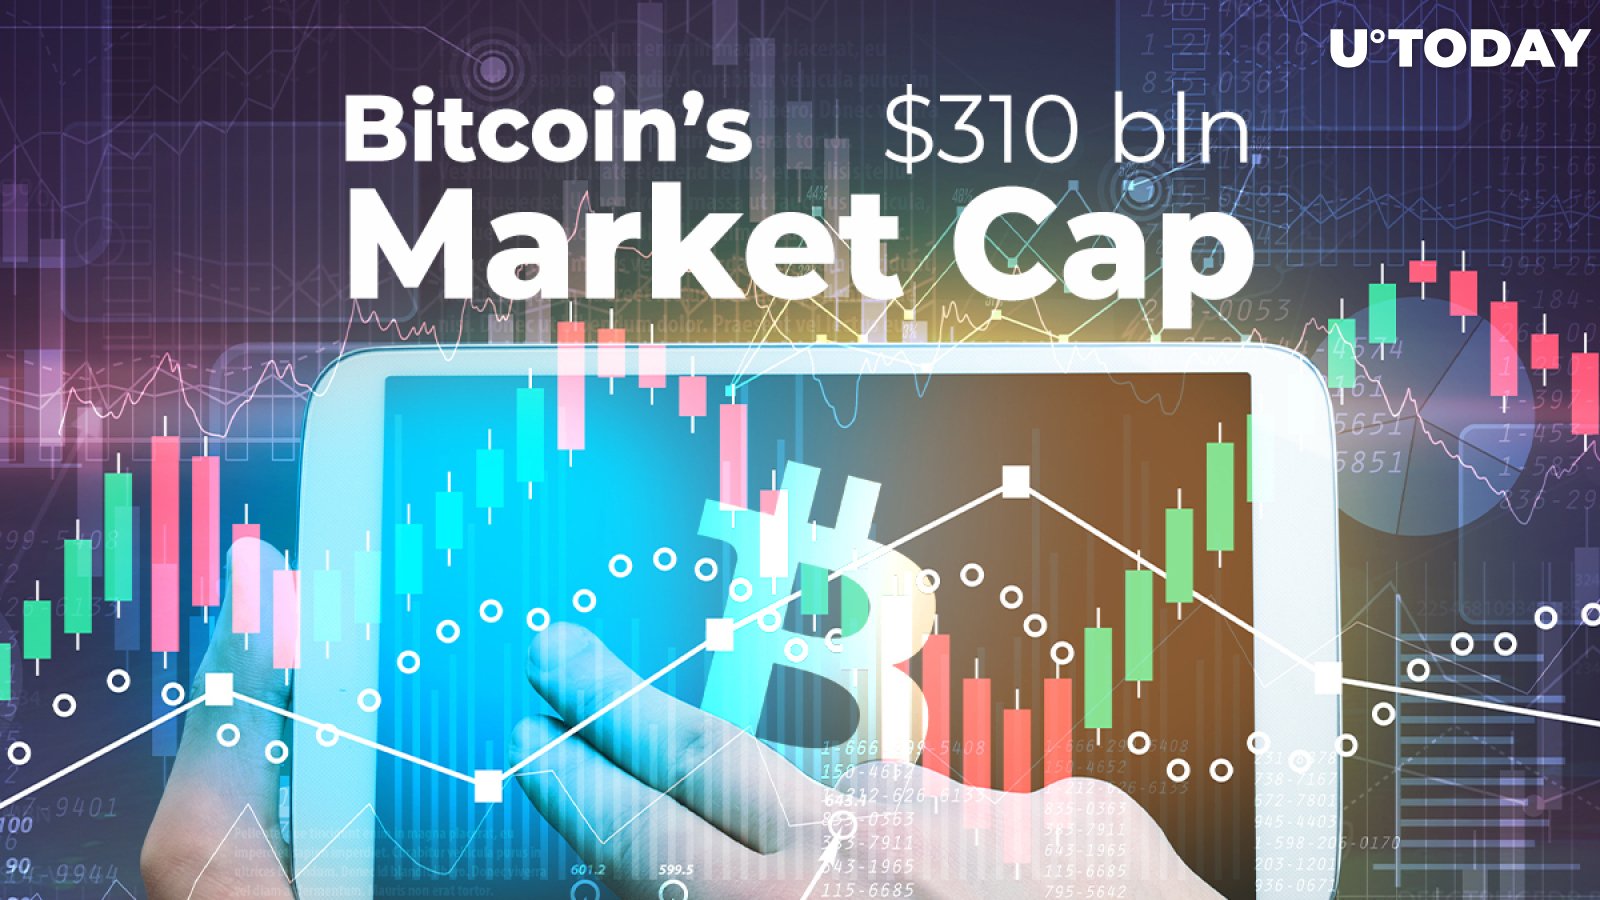 Bitcoin's Market Cap is 4% Away from New All-Time High of $310 Bln: River Financial Cofounder